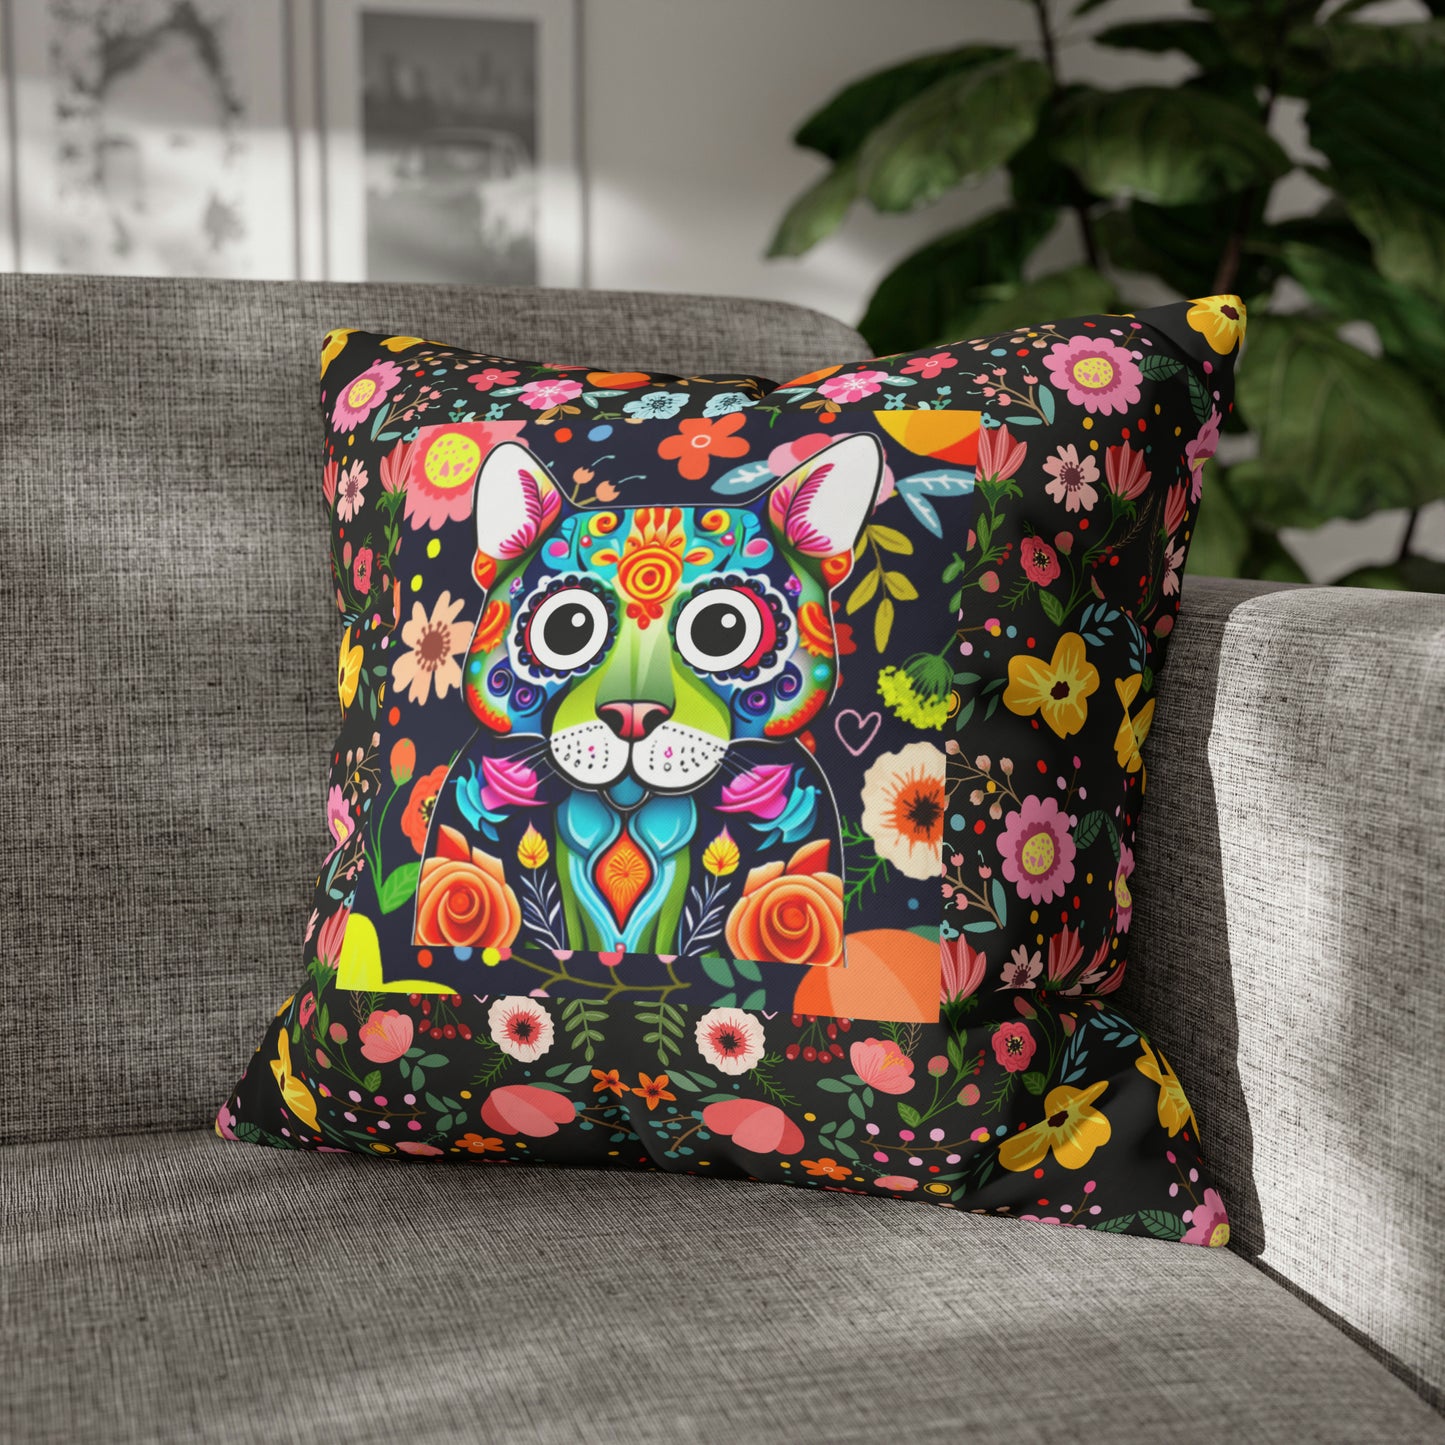 Flower Power Kitty Cat Floral Art Children's Playroom Nursery Art Square Poly Canvas Pillow Cover